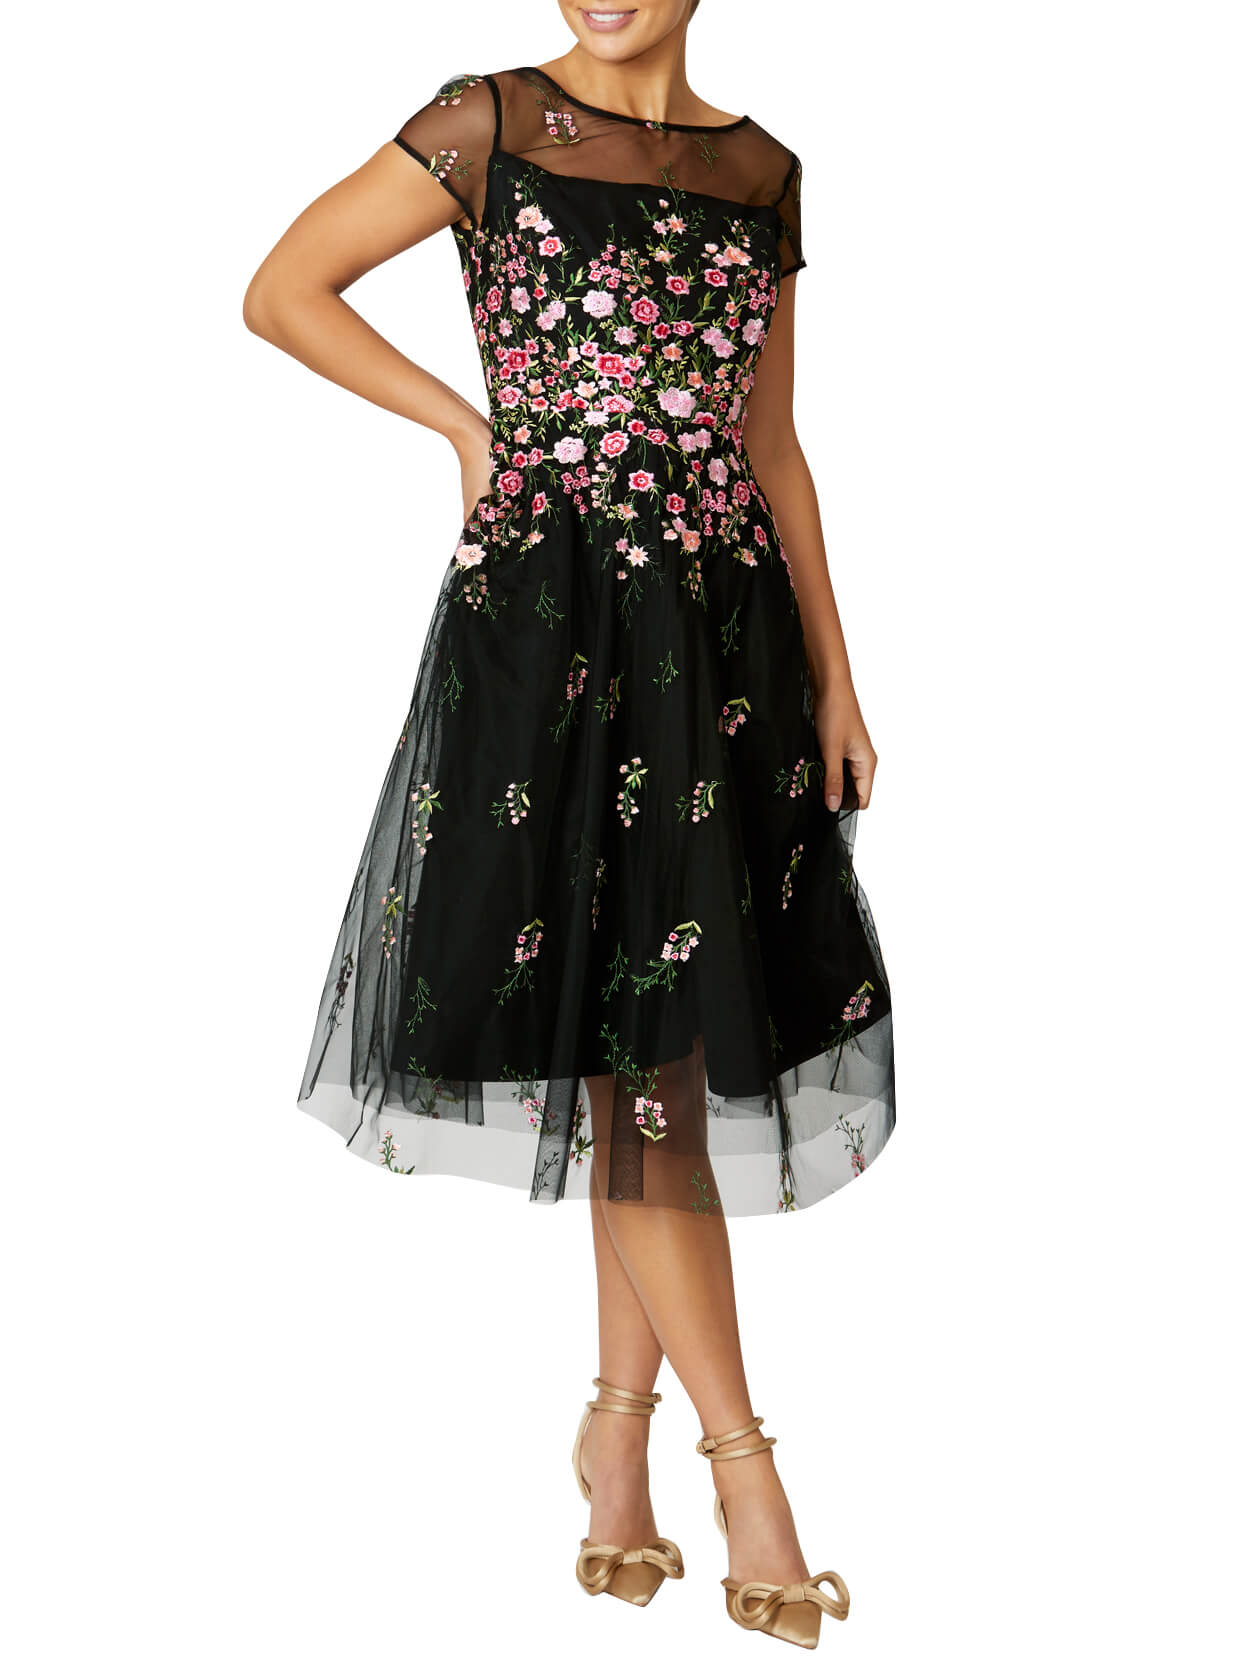 Maria Floral Dress in Pink and Black